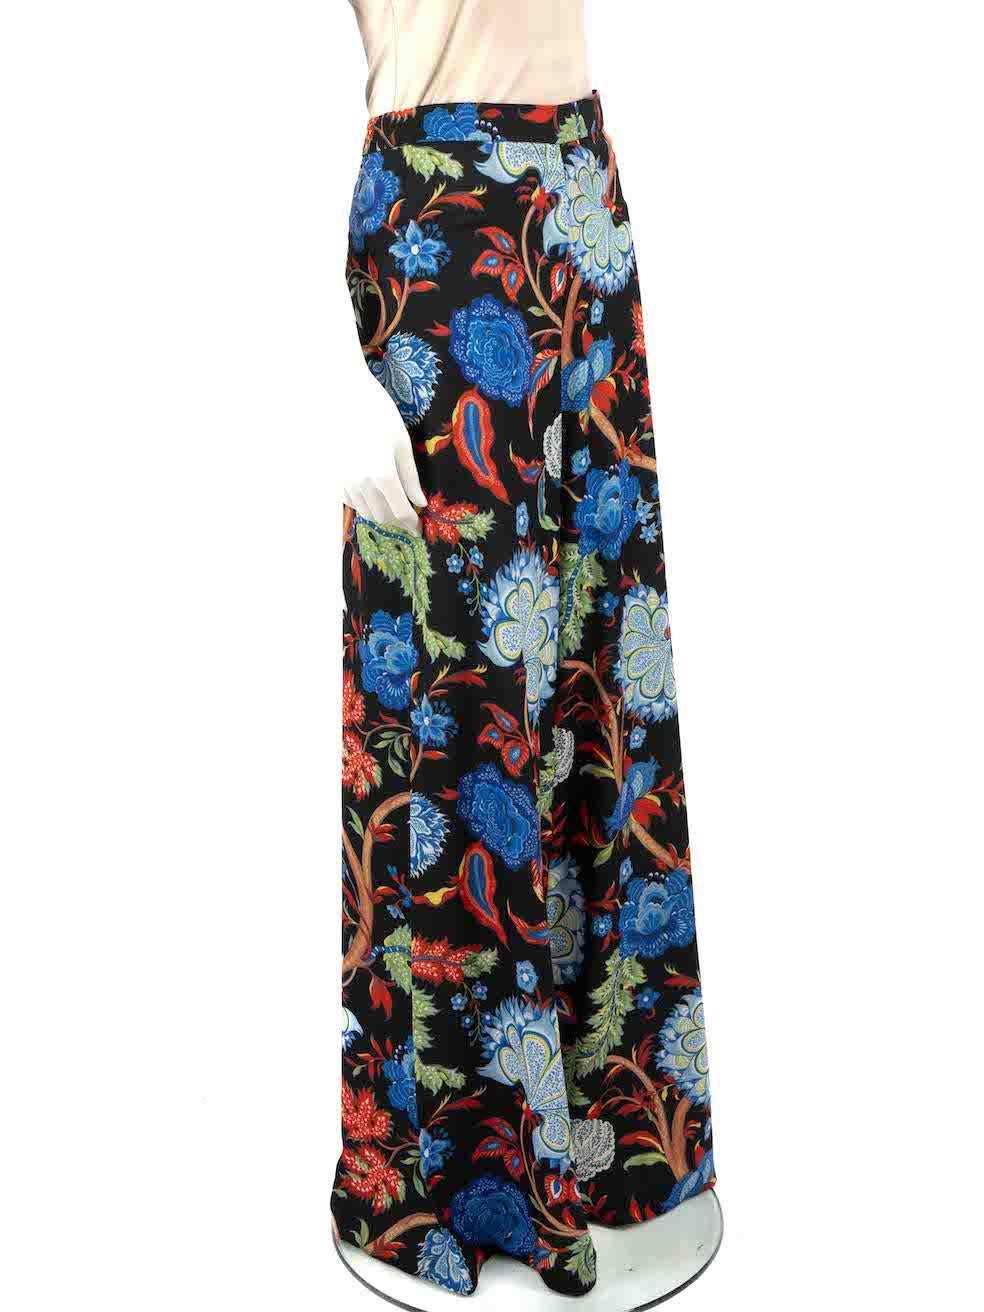 CONDITION is Very good. Minimal wear to trousers is evident. Minor pulls to fabric on back of right leg on this used Alice + Olivia designer resale item.
 
 
 
 Details
 
 
 Multicolour
 
 Polyester
 
 Trousers
 
 Floral pattern
 
 Wide leg
 
 High